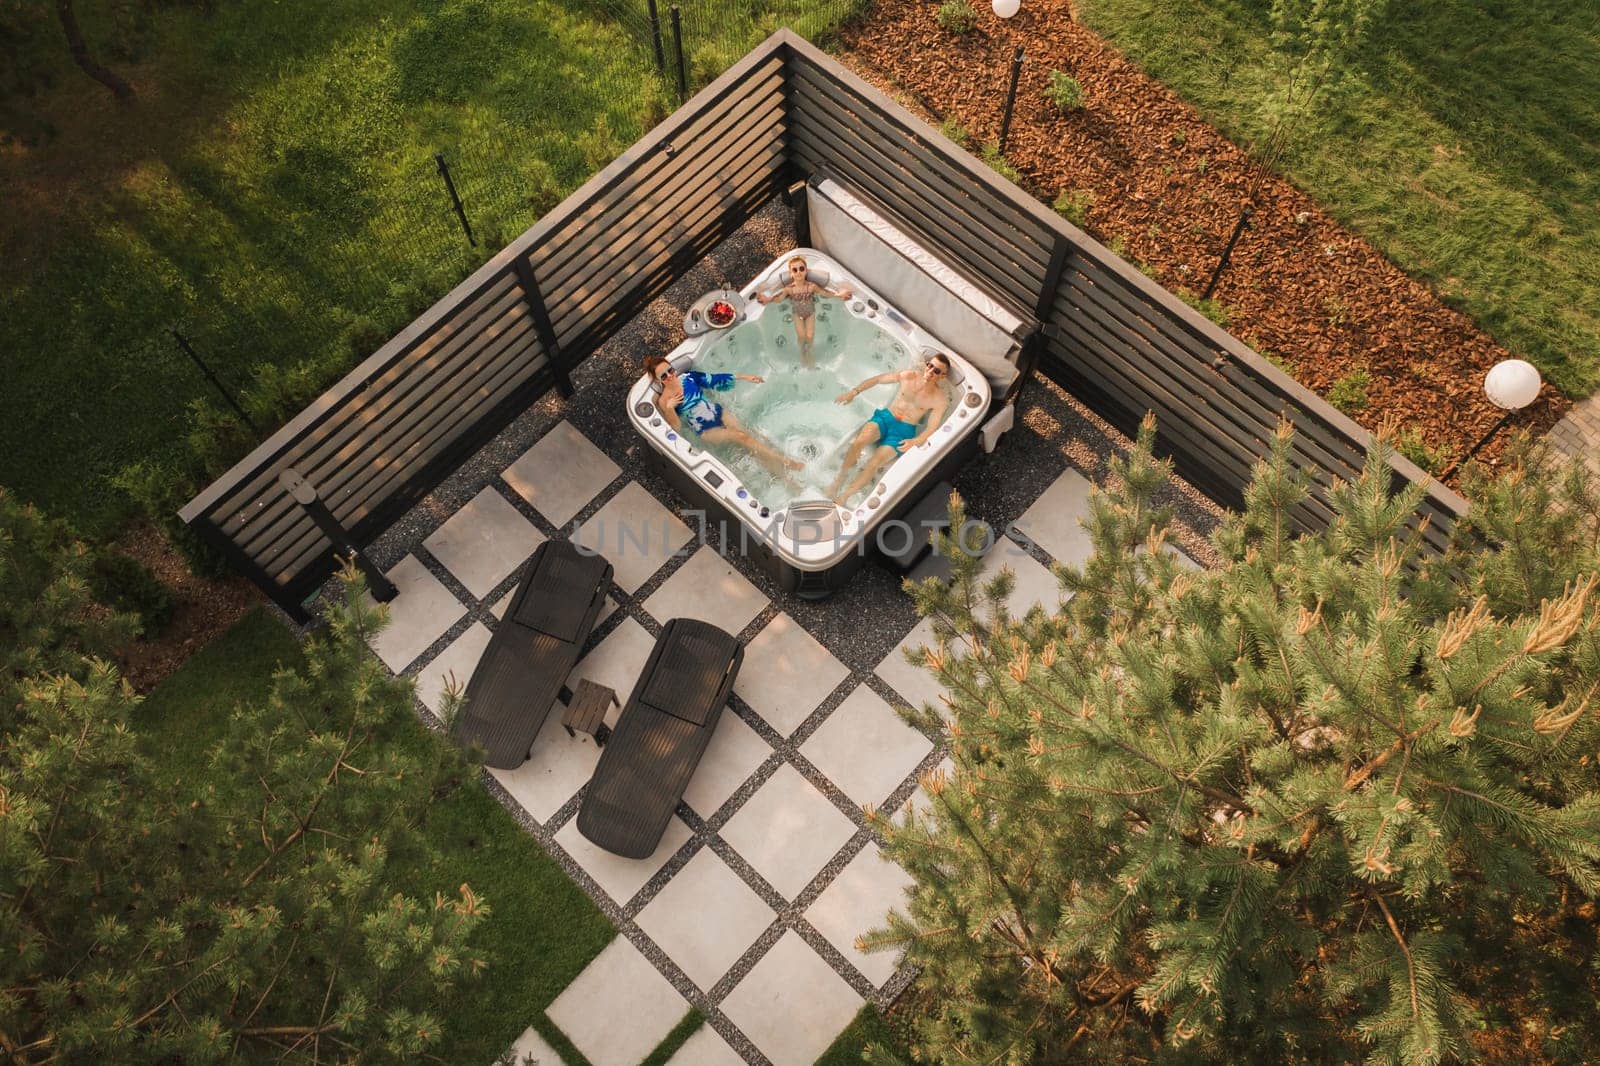 Top view of a family relaxing in an outdoor hot tub in summer.